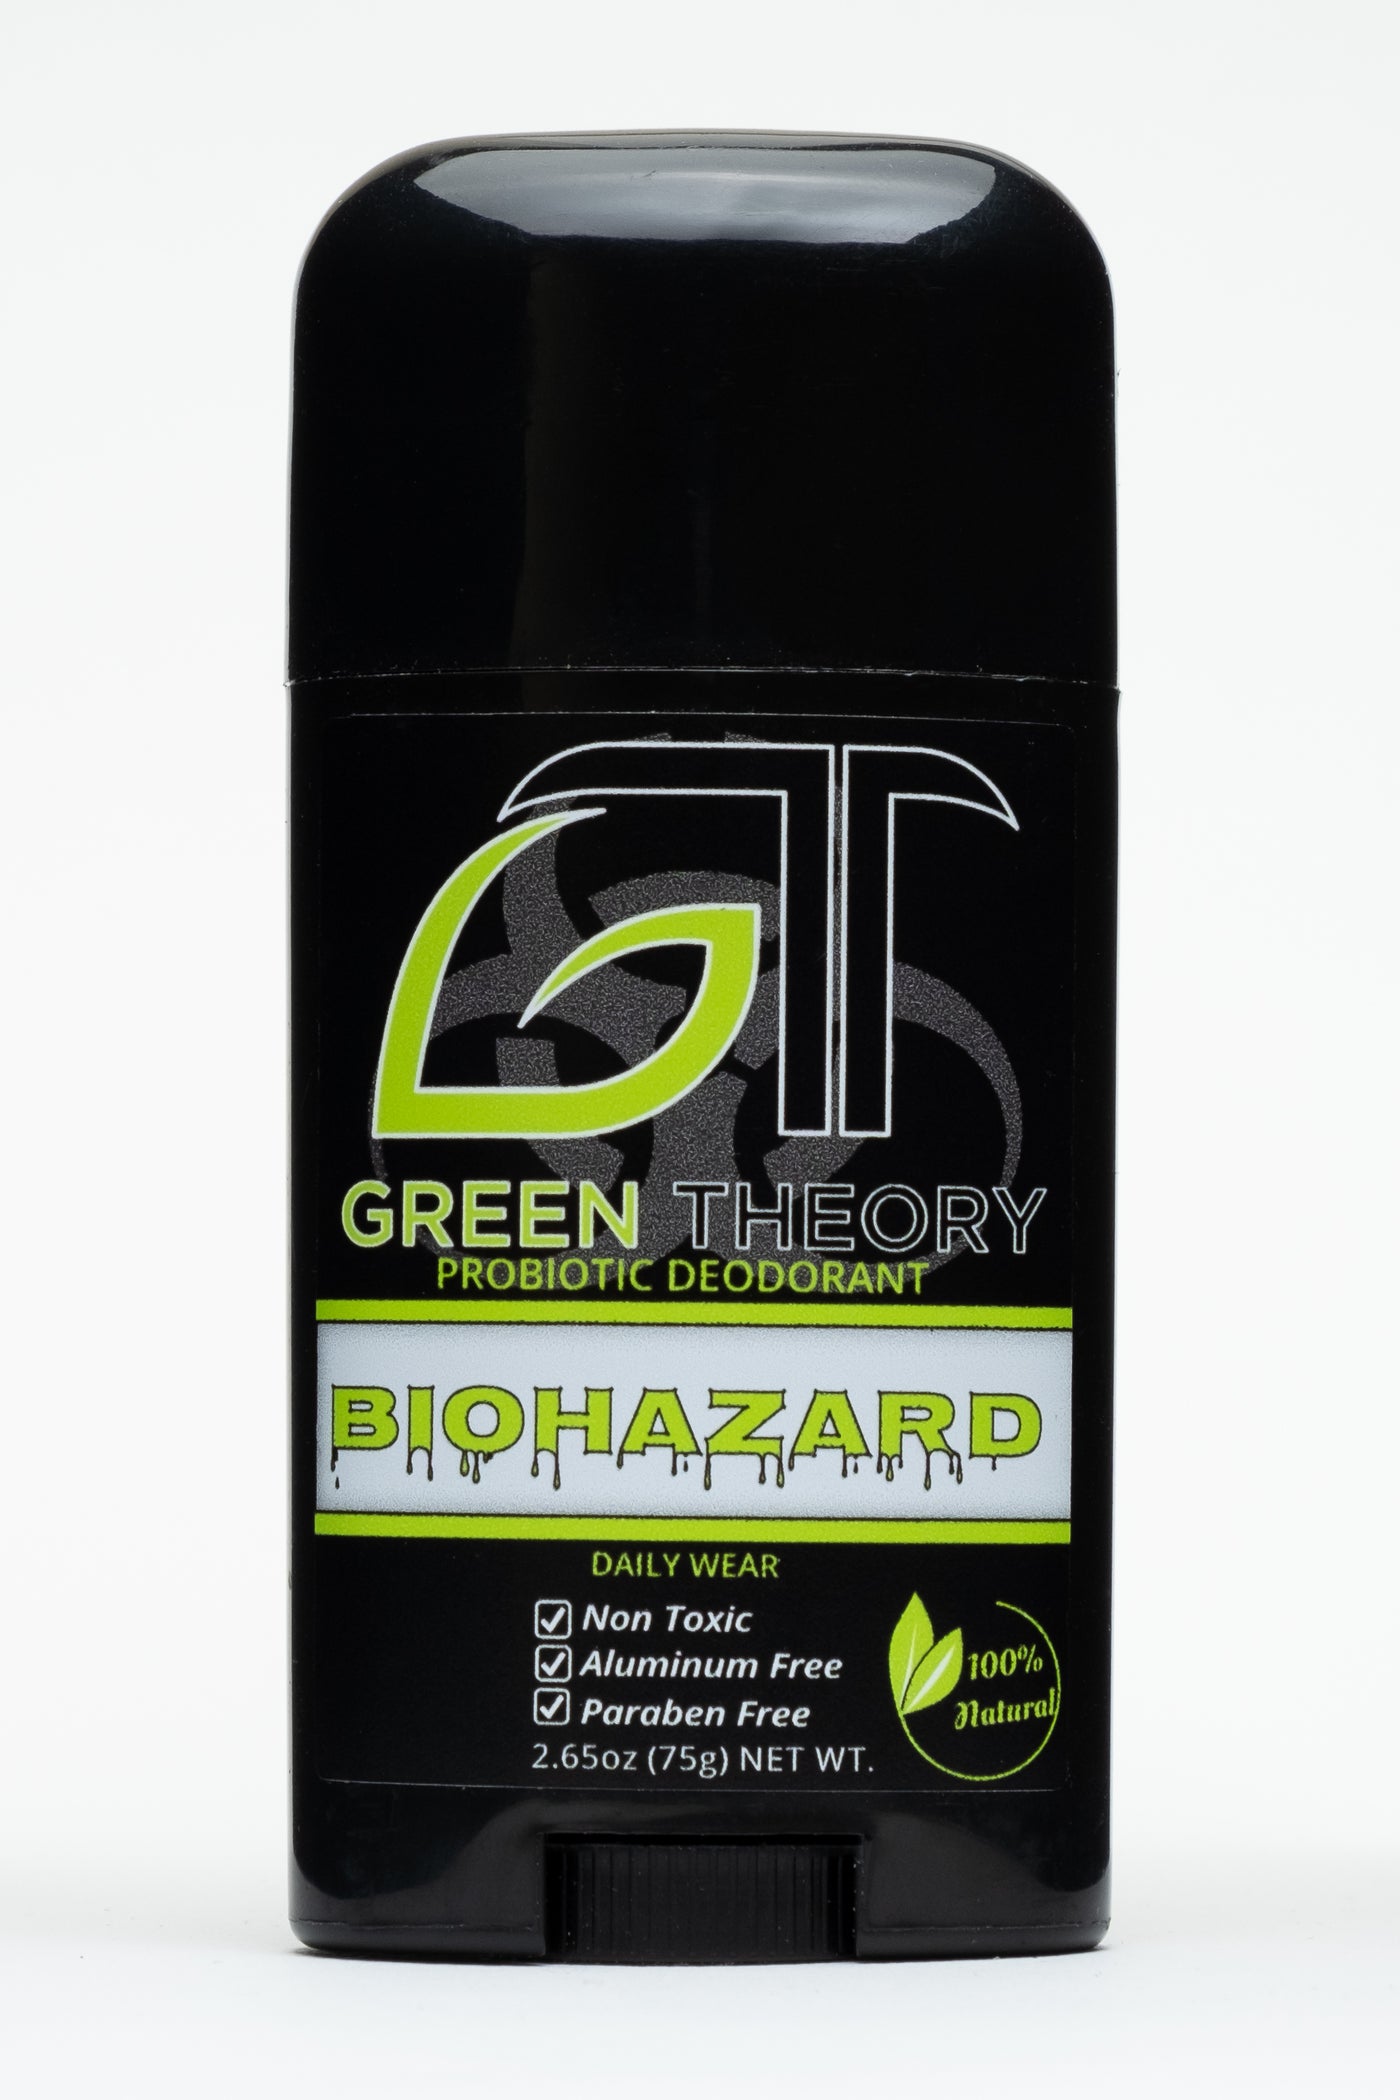 photo of Green Theory Biohazard probiotic deodorant front. Product is standing against a black background. It comes in a shiny black plastic container. Front label features a large GT stylized logo with the G in the shape of a leaf. The logo is imposed over a biohazard symbol. Product name is written in a dripping font and lists "non toxic", Aluminum free" and "paraben free" as its freatures